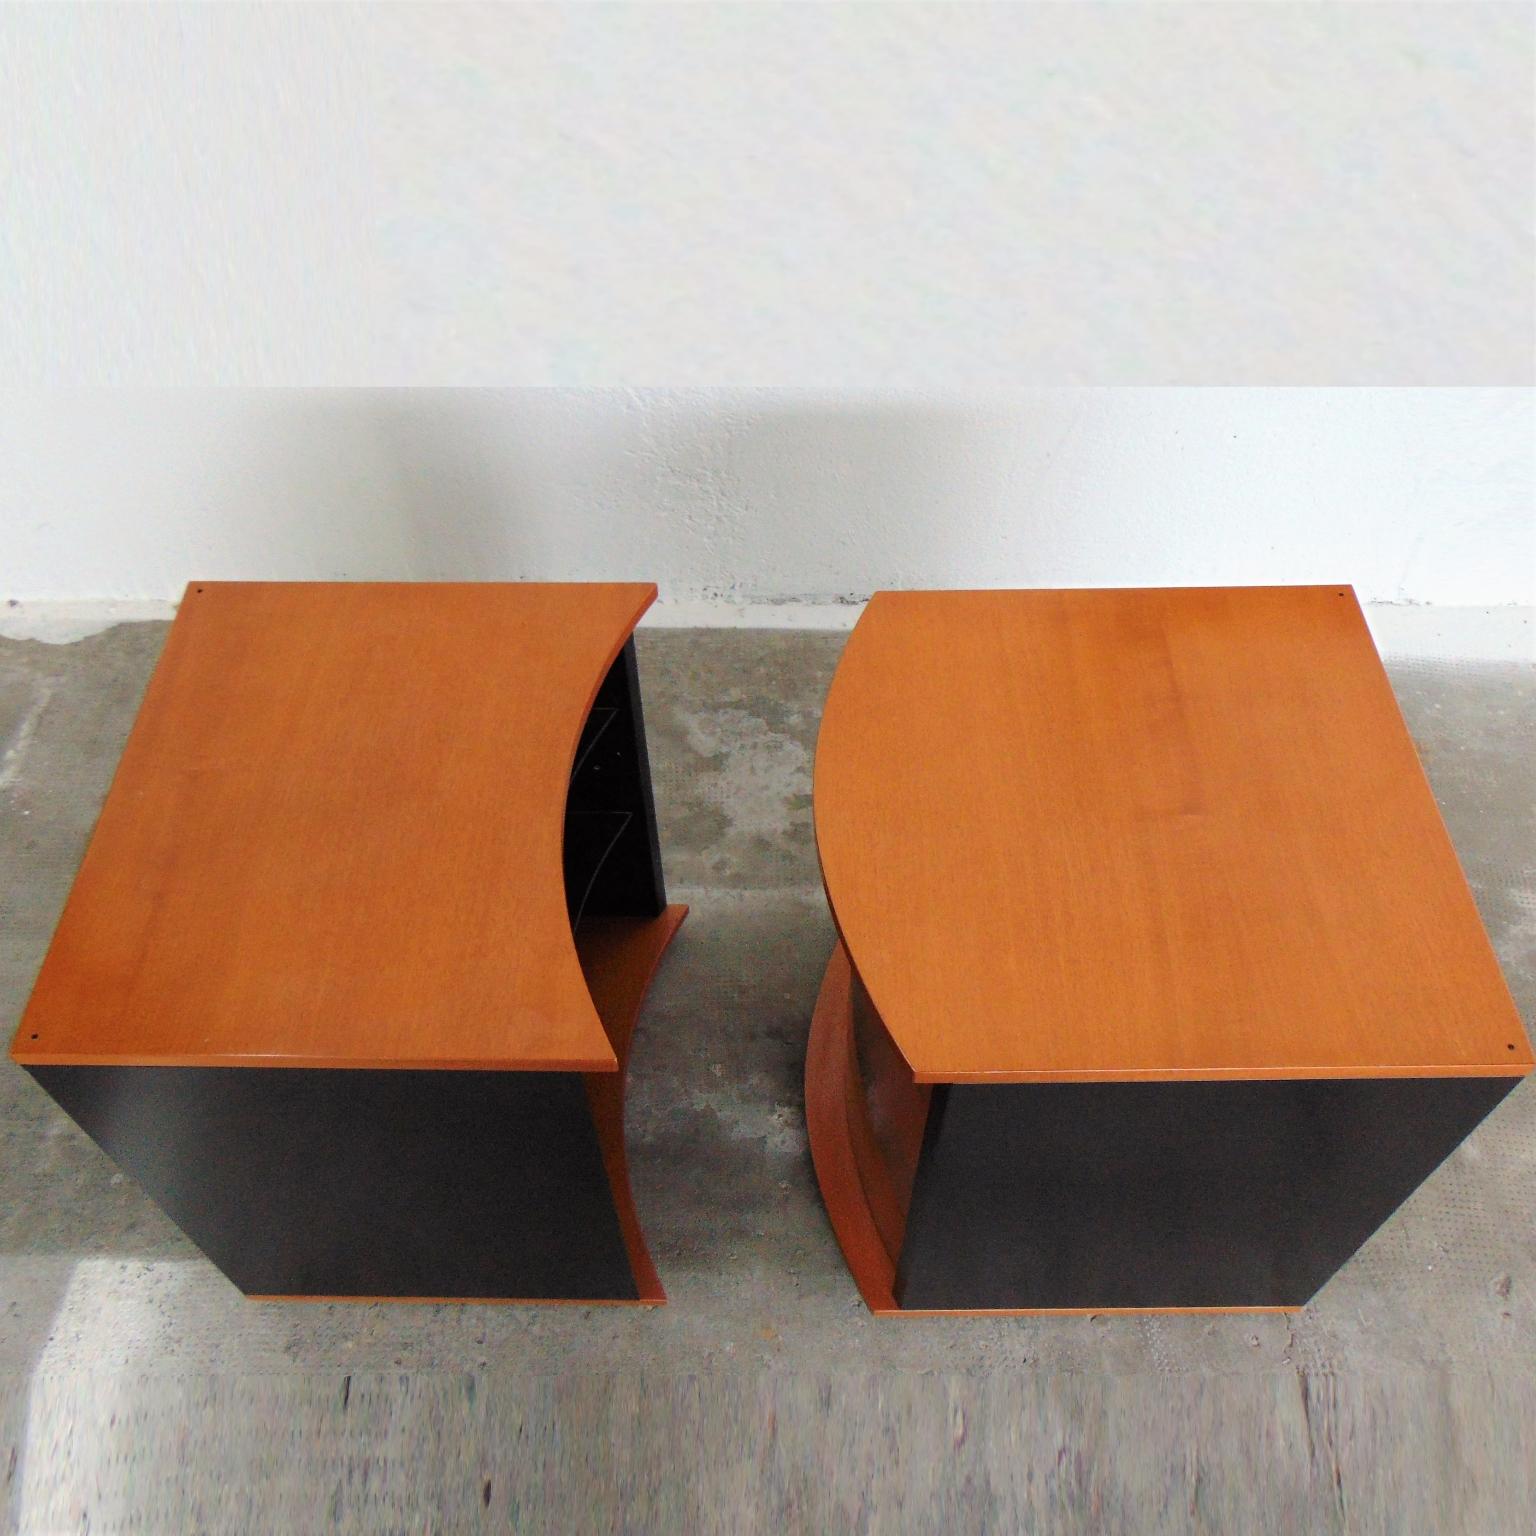 1990s Set of 2 Nightstands Walnut Stained Cherry and Black Lacquer, Roche Bobois For Sale 8